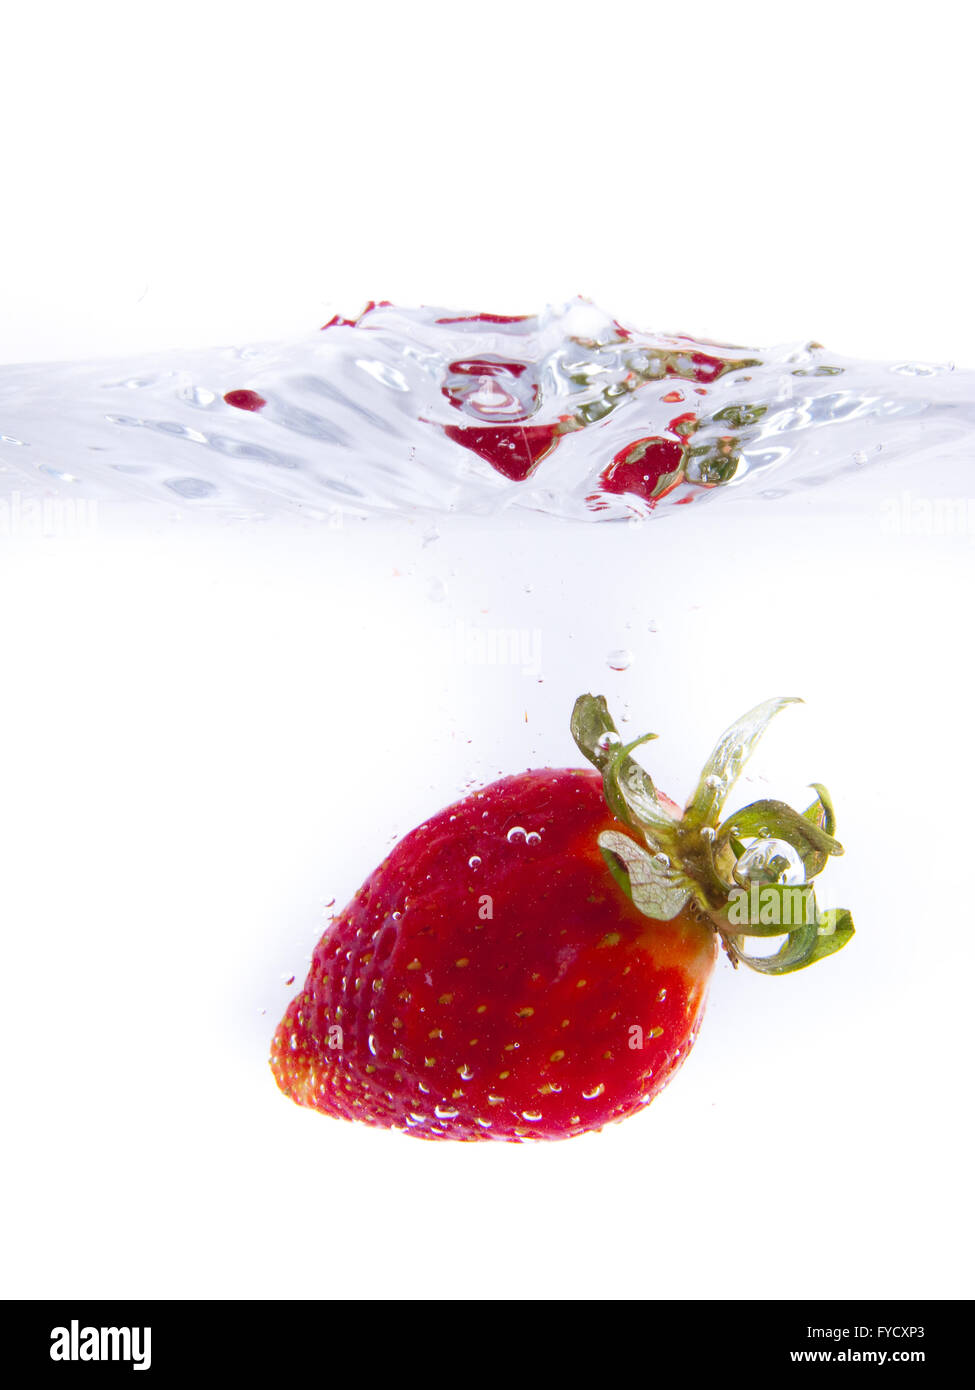 Fruits falling into the water Stock Photo